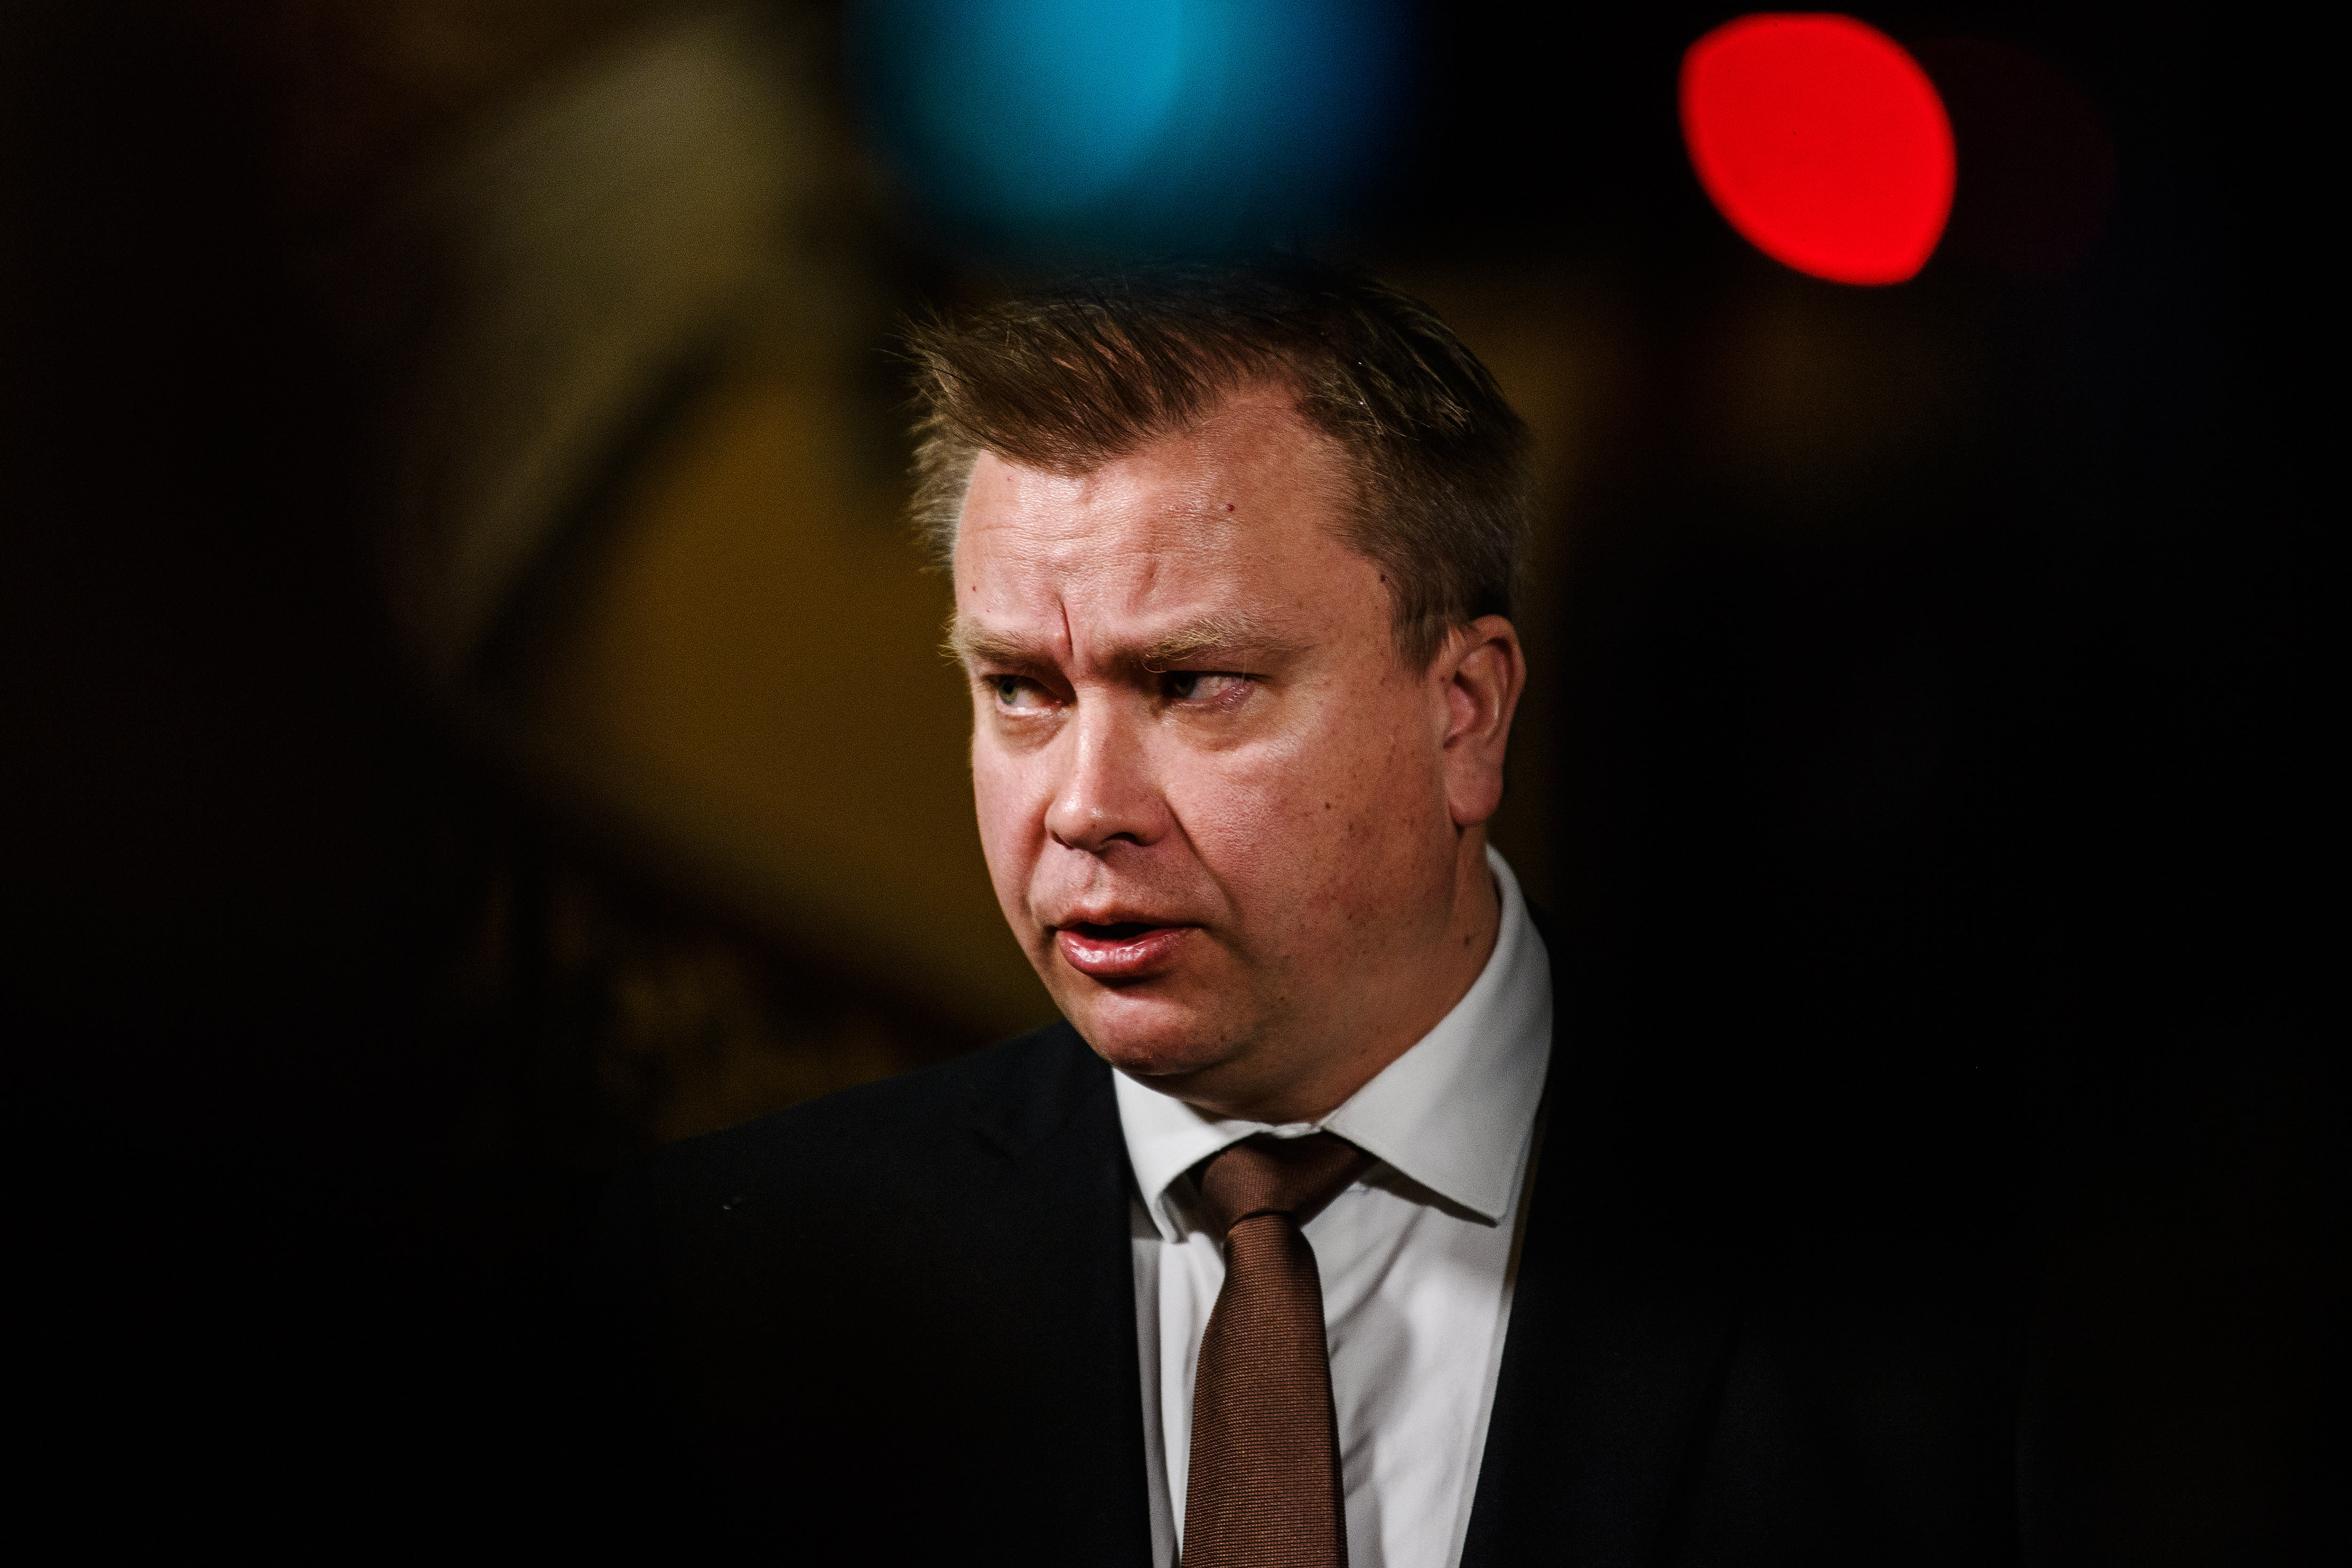 The Finnish Minister of Defense headed to the NATO dinner meeting